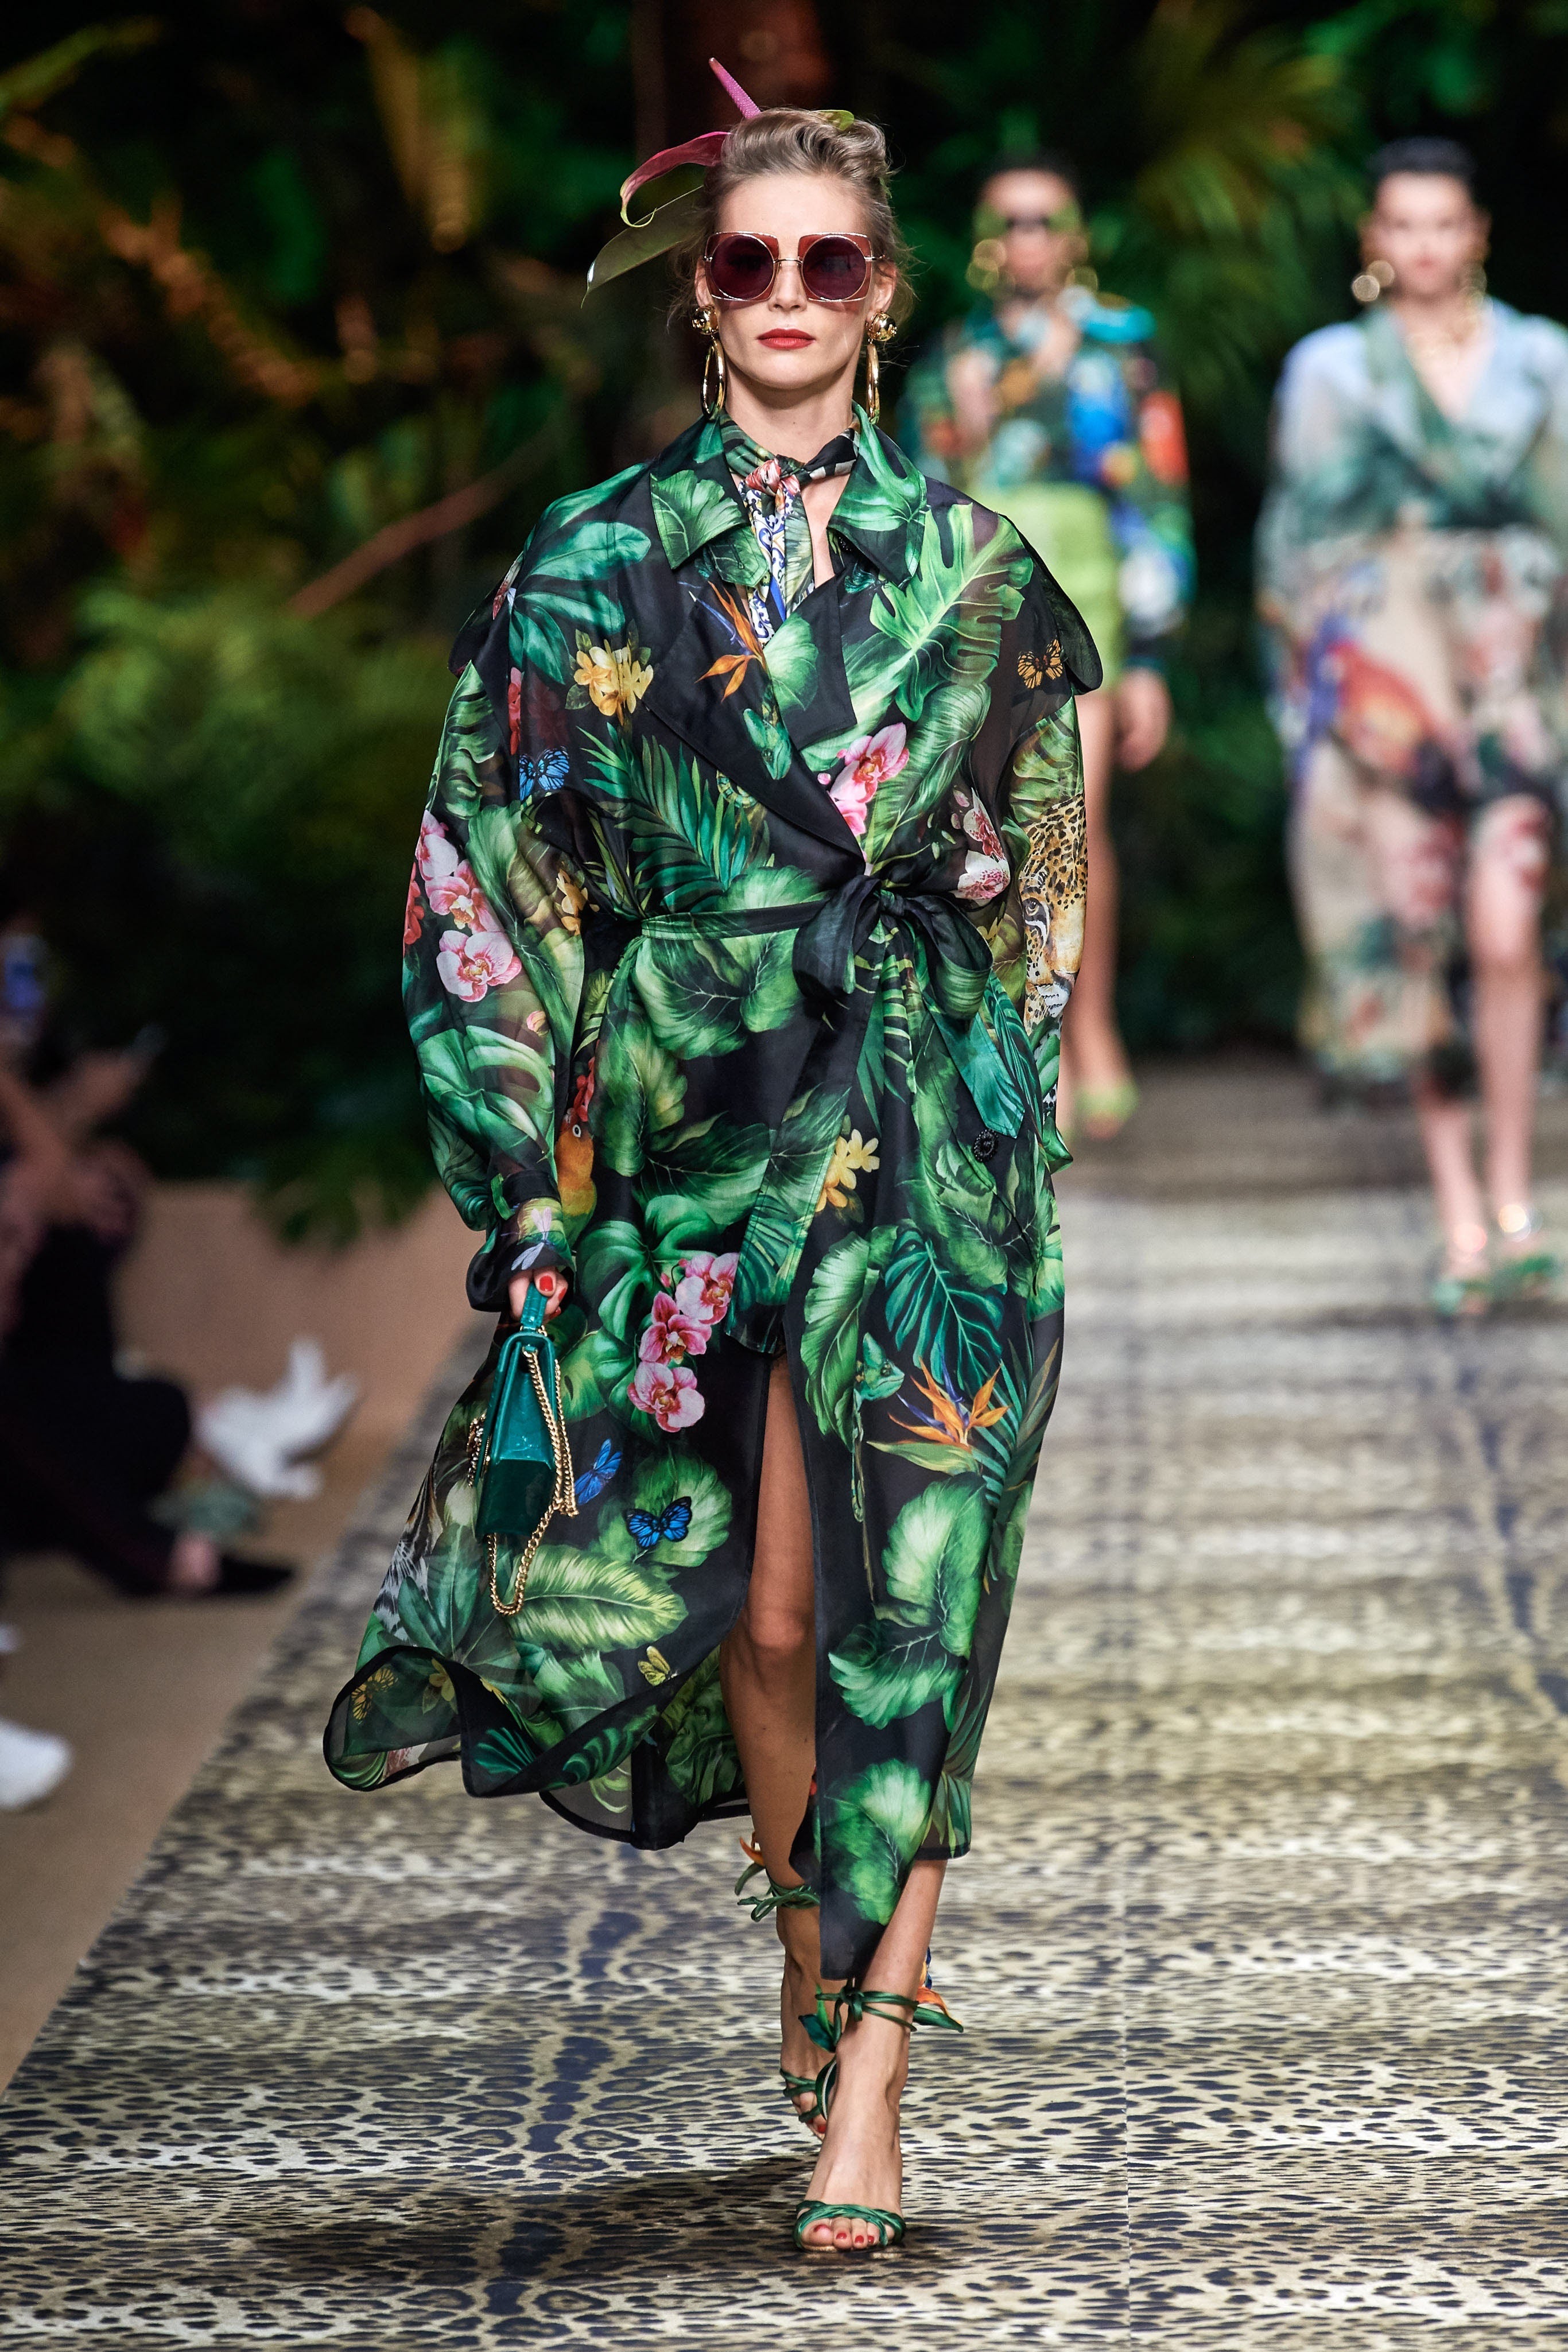 Model on runway for Dolce and Gabbana Spring 2020 wearing jacket with skirt print